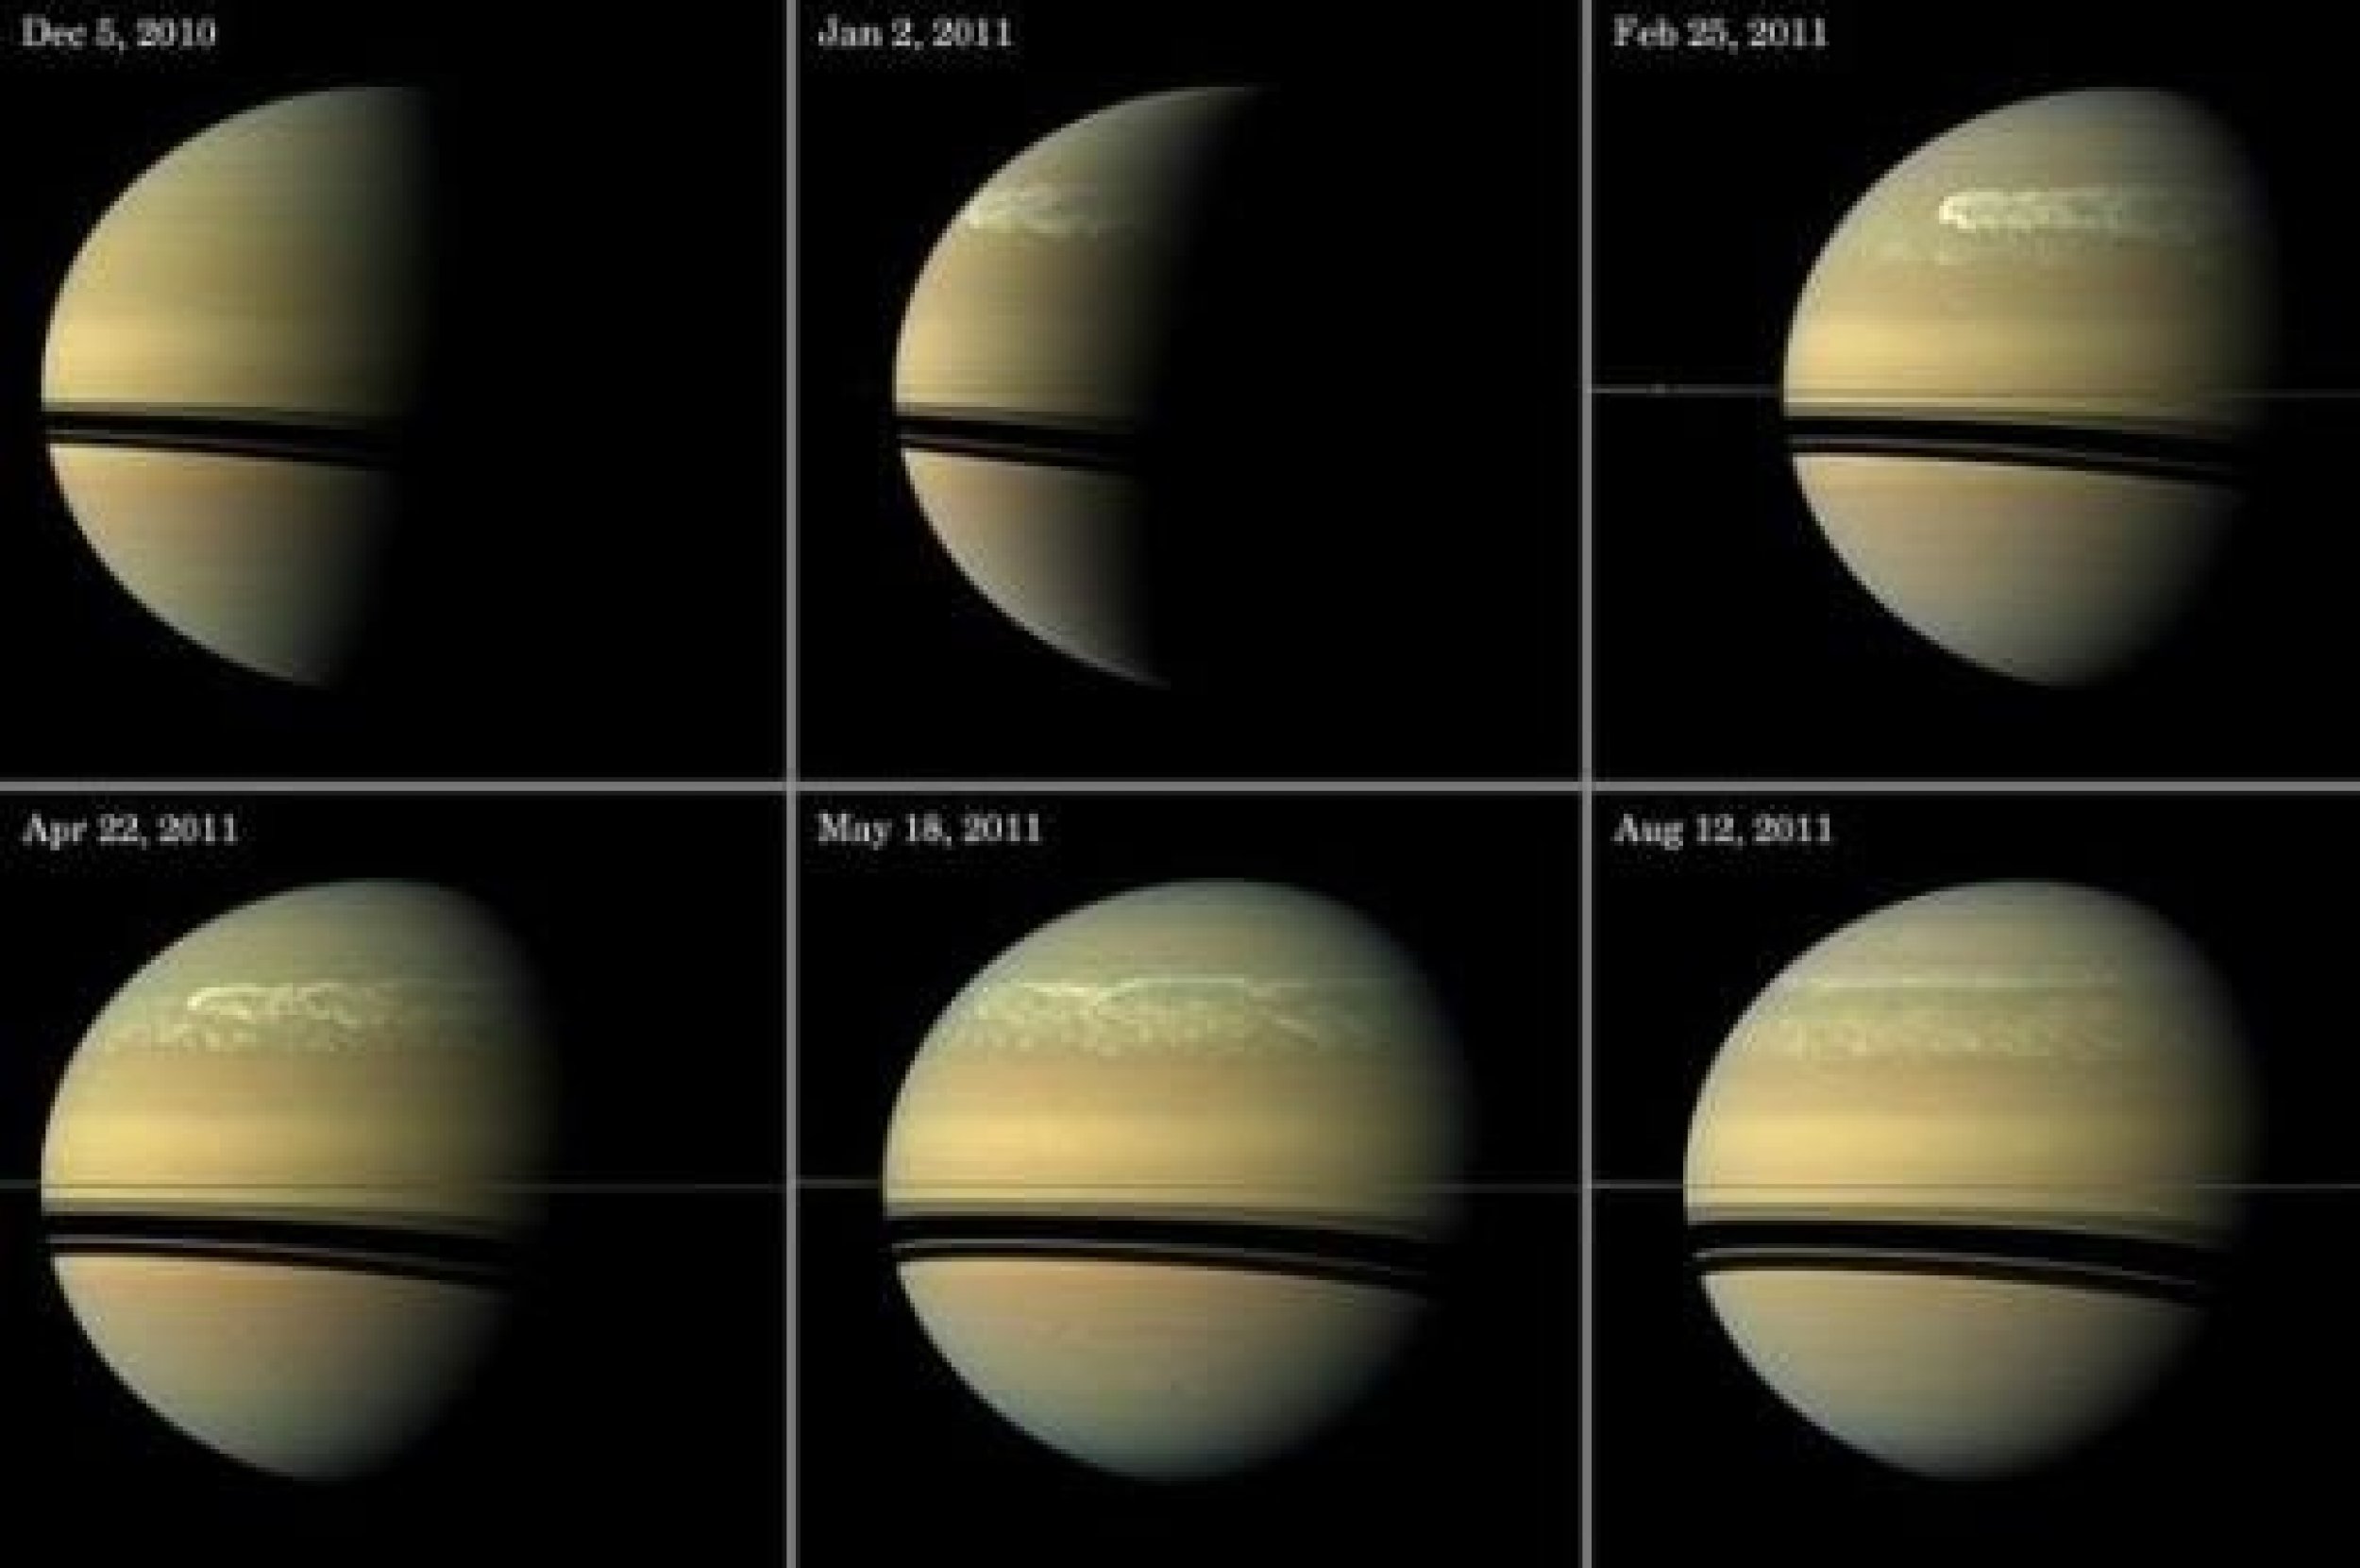 Development of the giant storm seen on the planet since 1990